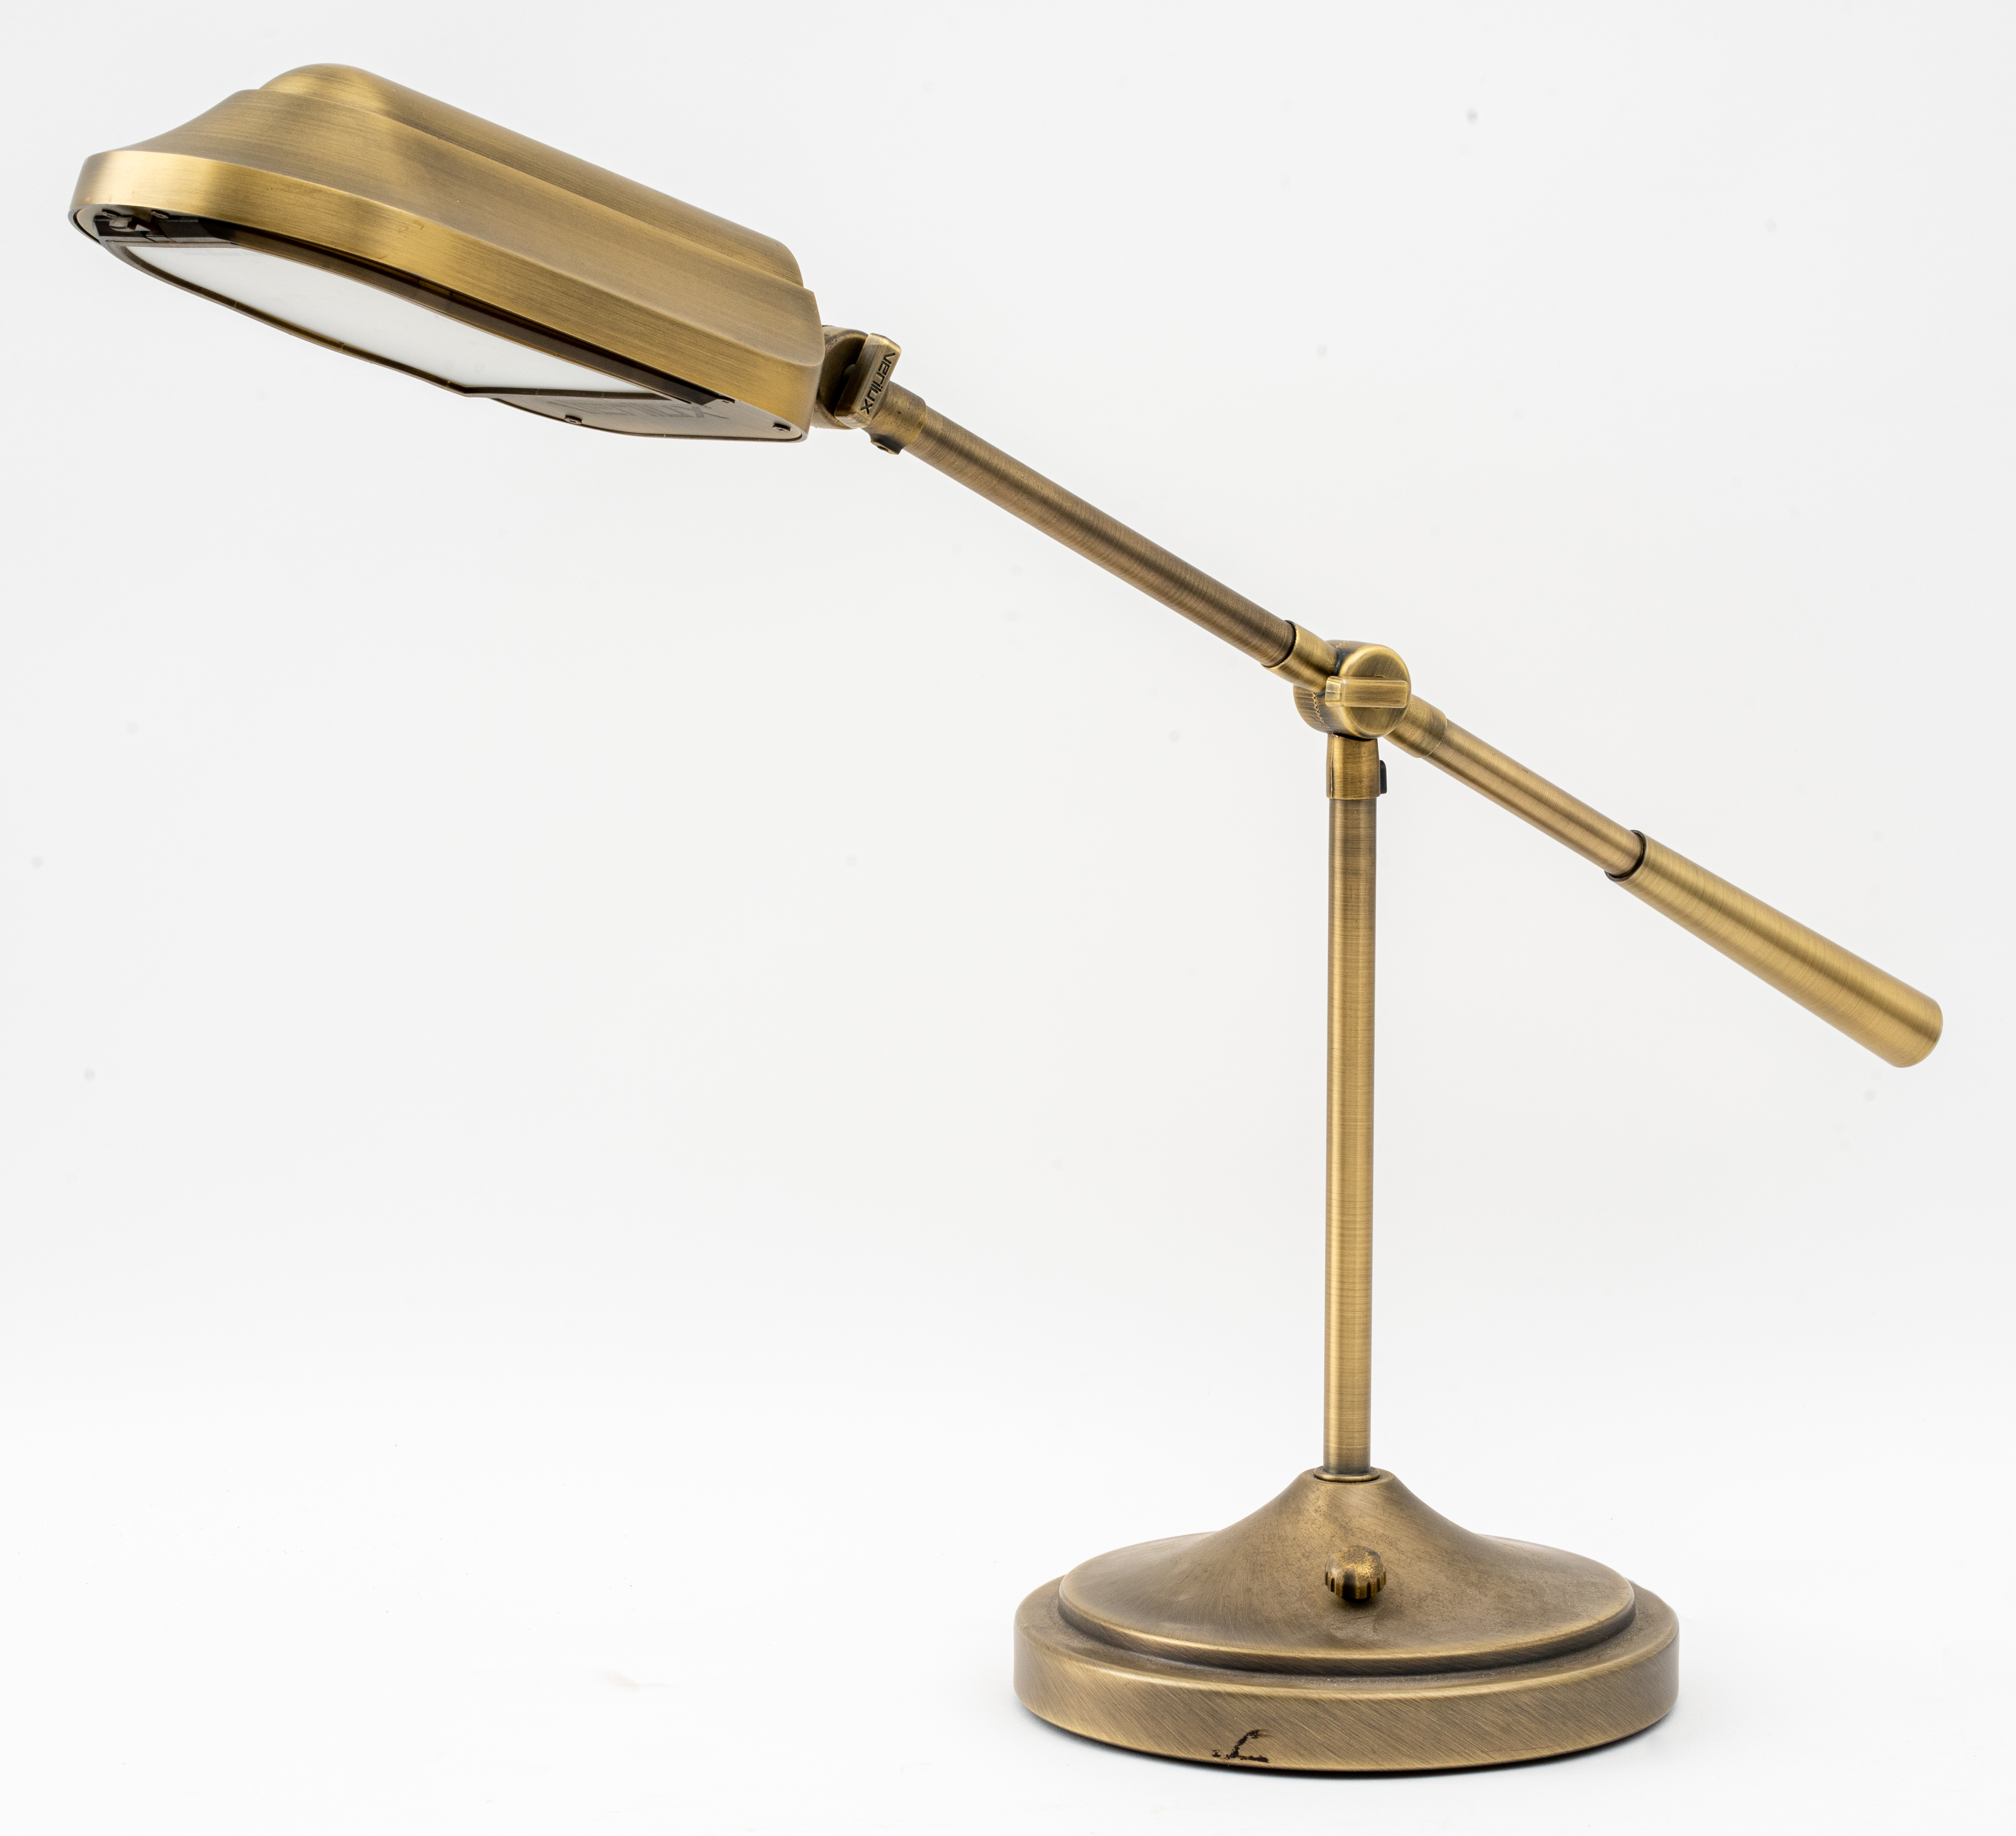 VERILUX BRUSHED BRASS TABLE LAMP 363bde